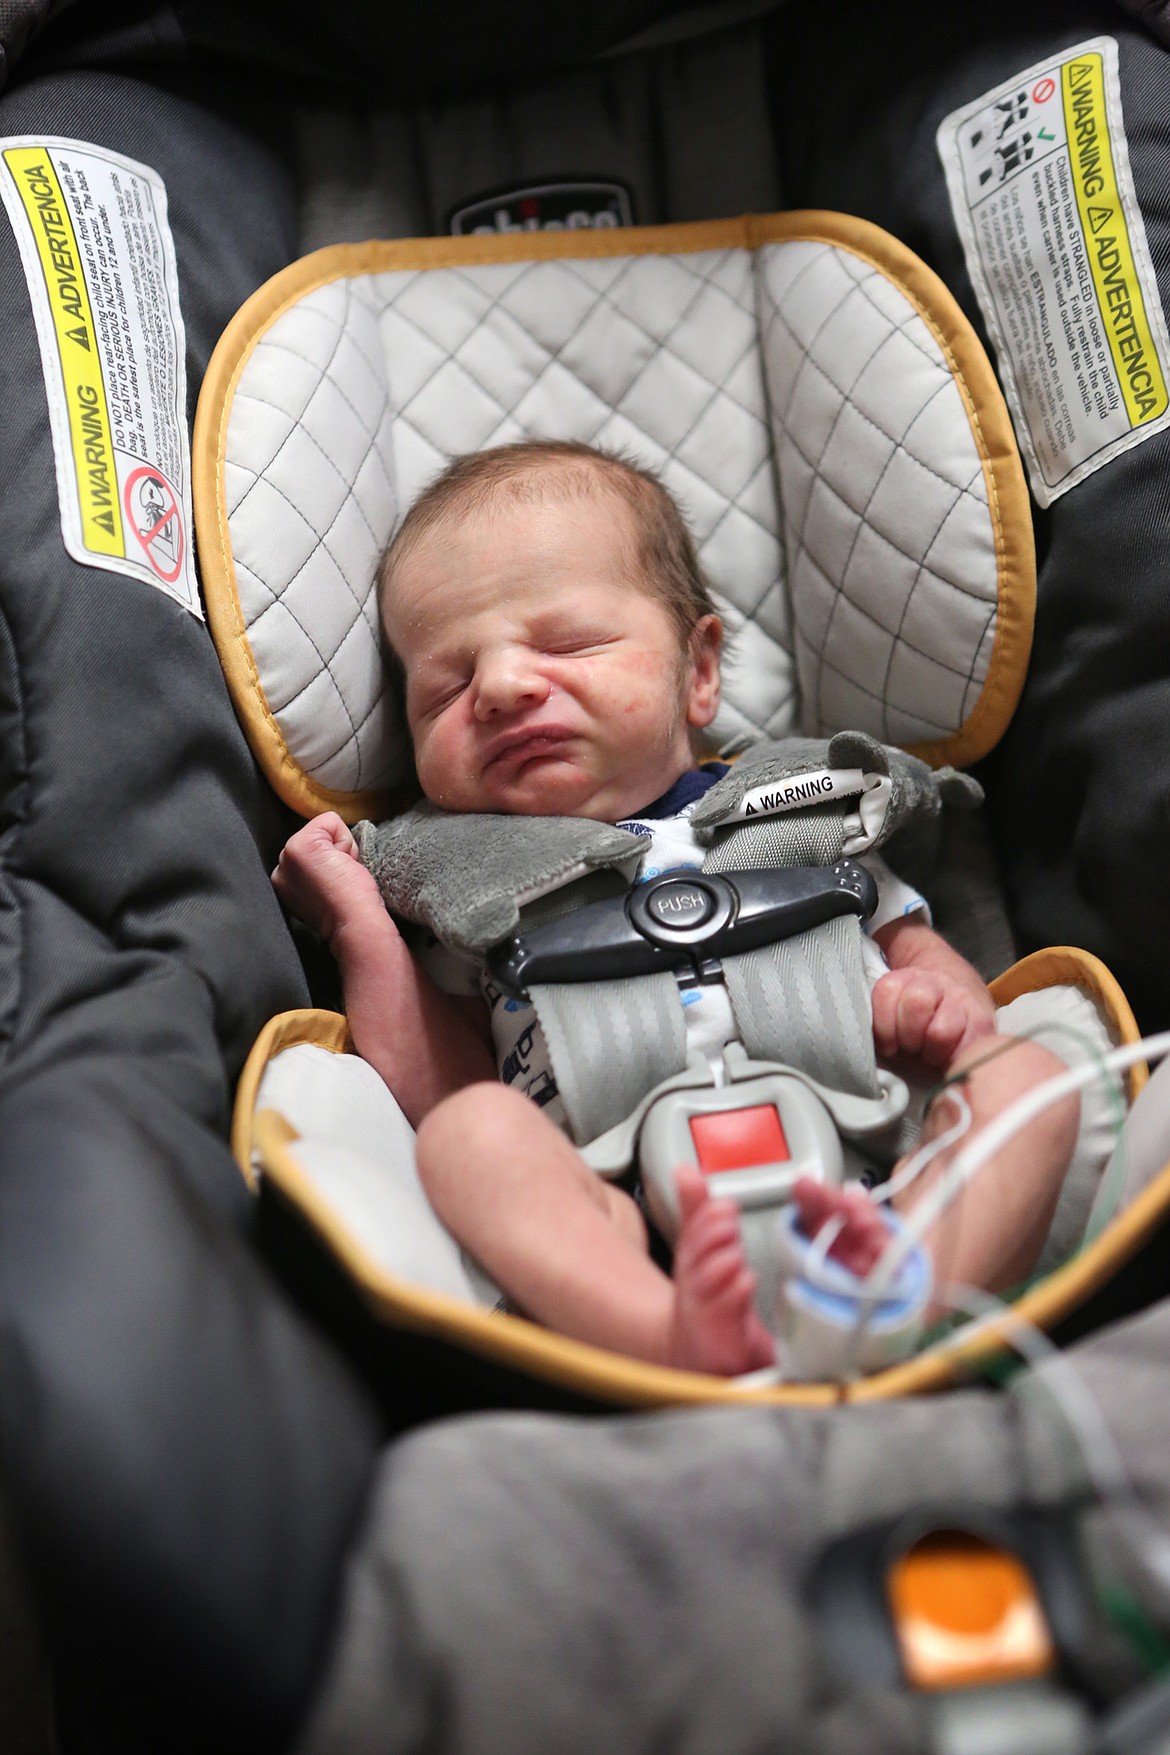 Jedidiah Hall undergoes a carseat test at Kalispell Regional Medical Center&#146;s NICU on Wednesday morning. Hall weighs in at 5 pounds, 12 ounces and was born prematurely at 35 weeks and two days. (Mackenzie Reiss/Daily Inter Lake)